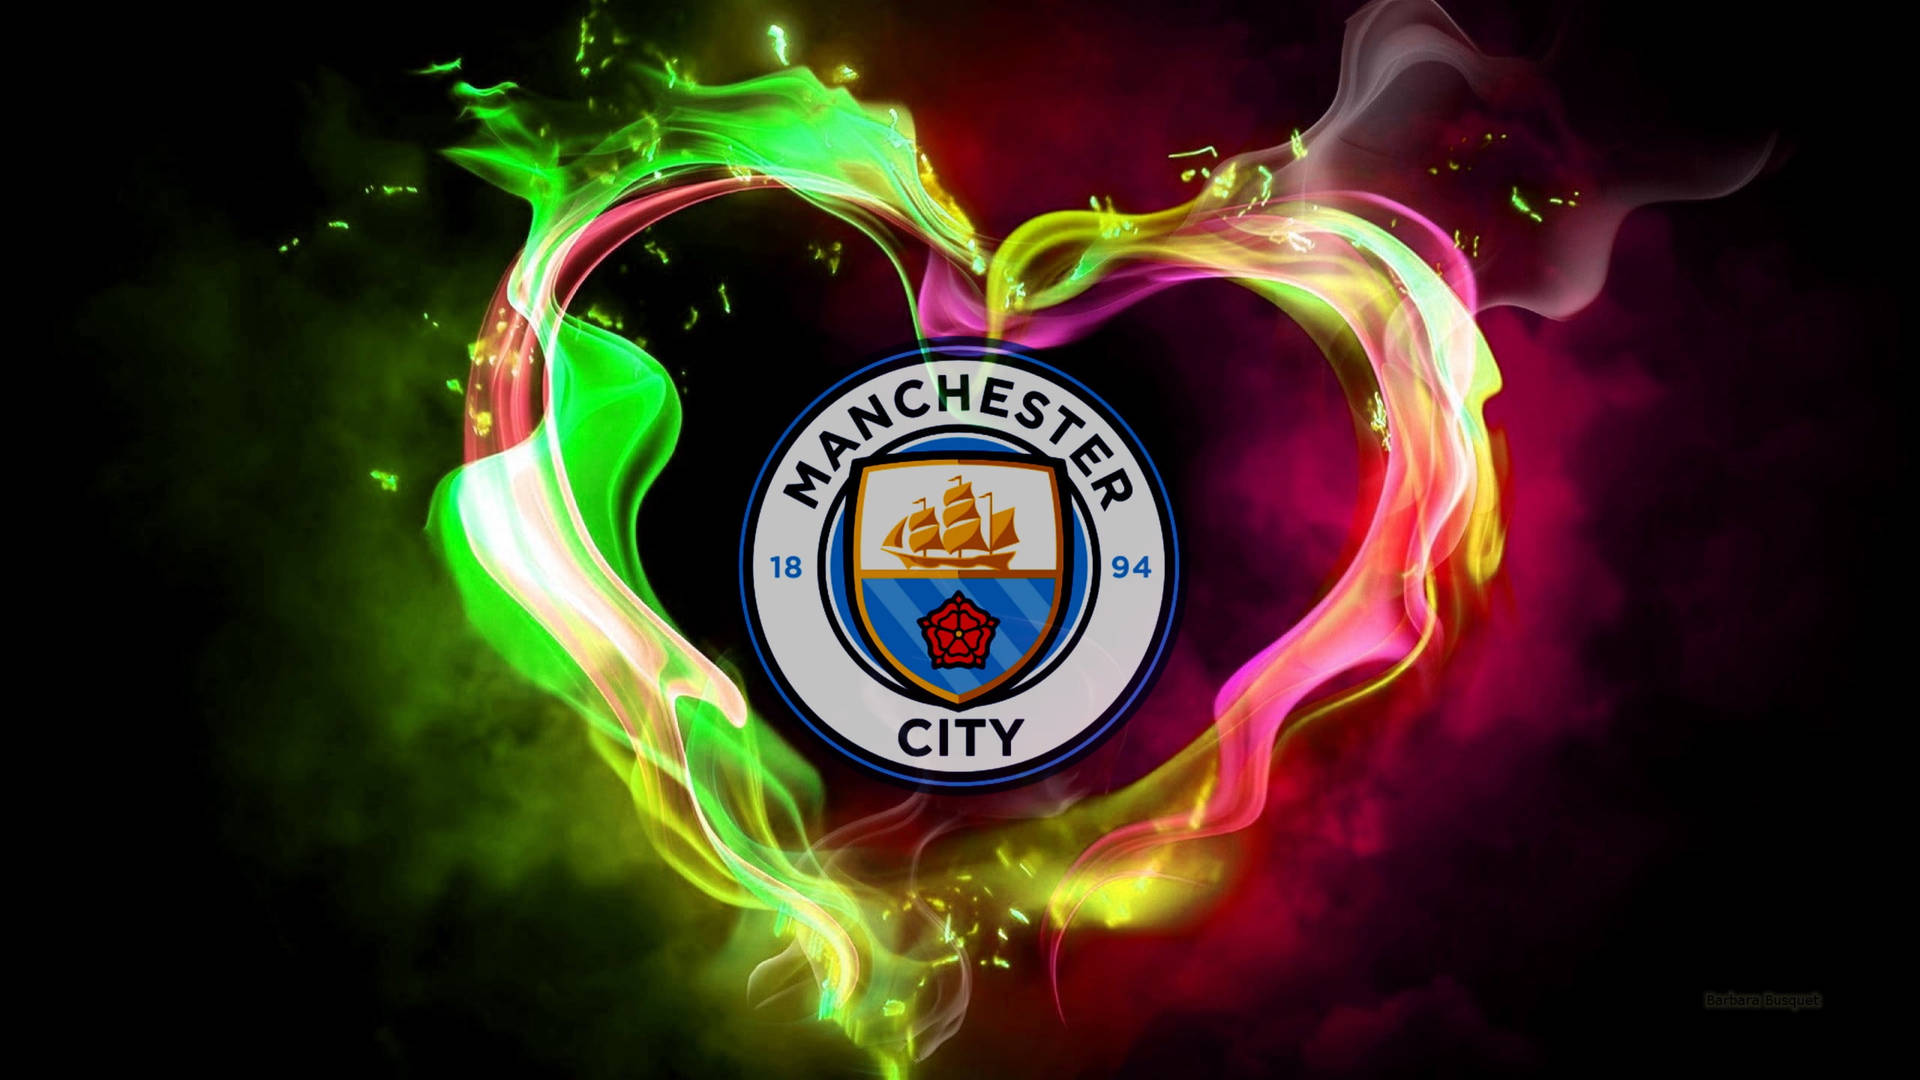 Light Up The City Of Manchester With The Manchester City Neon Heart Logo Background